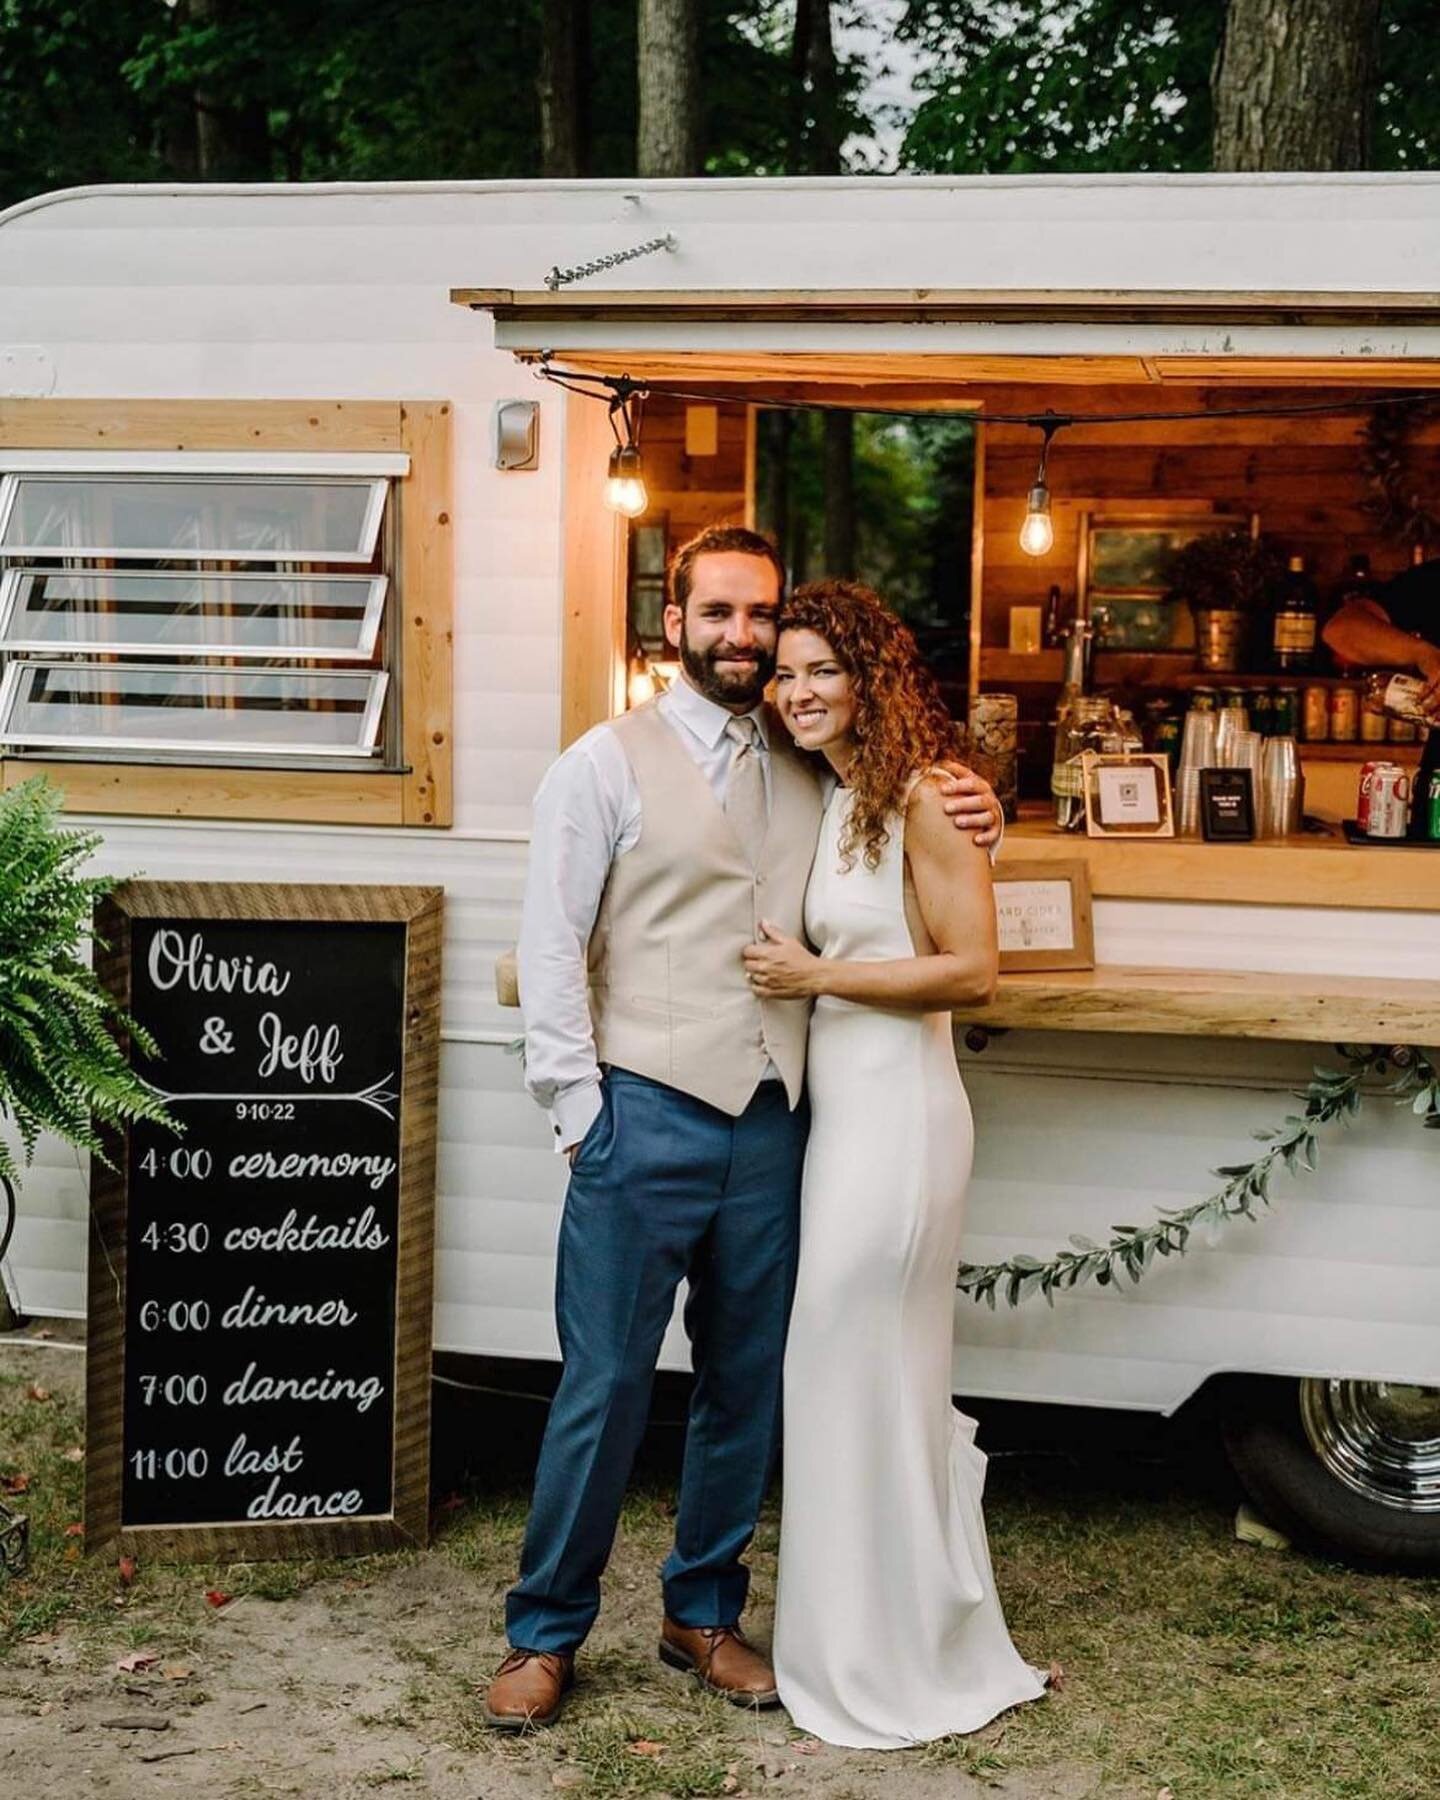 Olivia + Jeff 🌿 9.10.22

I&rsquo;m trying to play it cool with the caption, but I just have to add to it to say 😍😍😍! What a gorgeous couple! We just LOVE it when customers share their wedding pictures with us &mdash; especially when they have pic